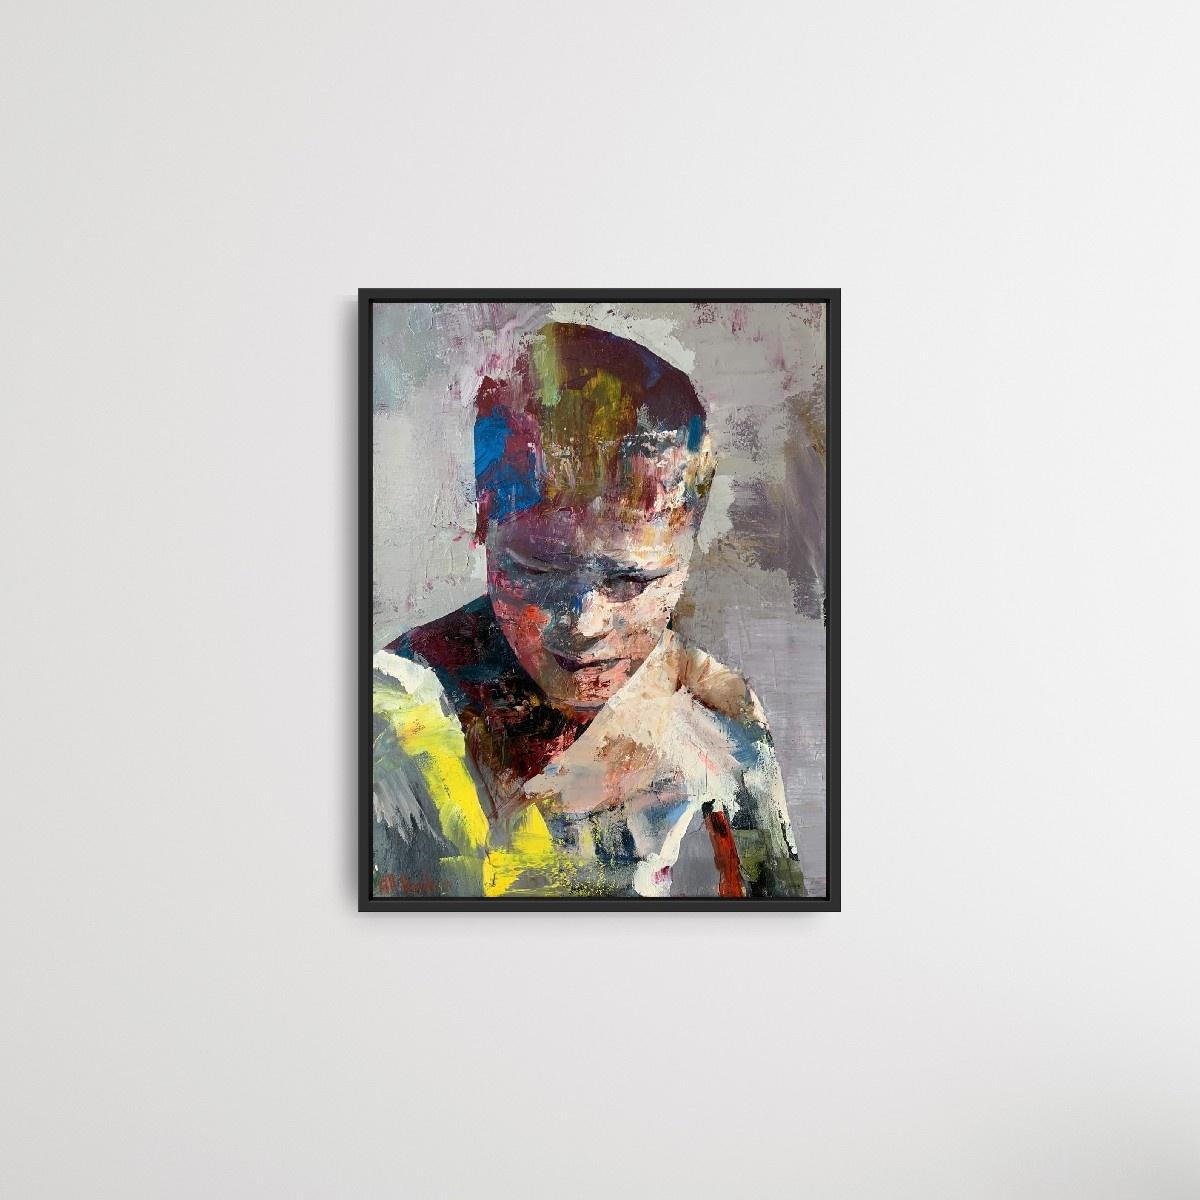 A Boy - Contemporary European Art, Oil on Canvas Painting, Colorful, Figurative 2